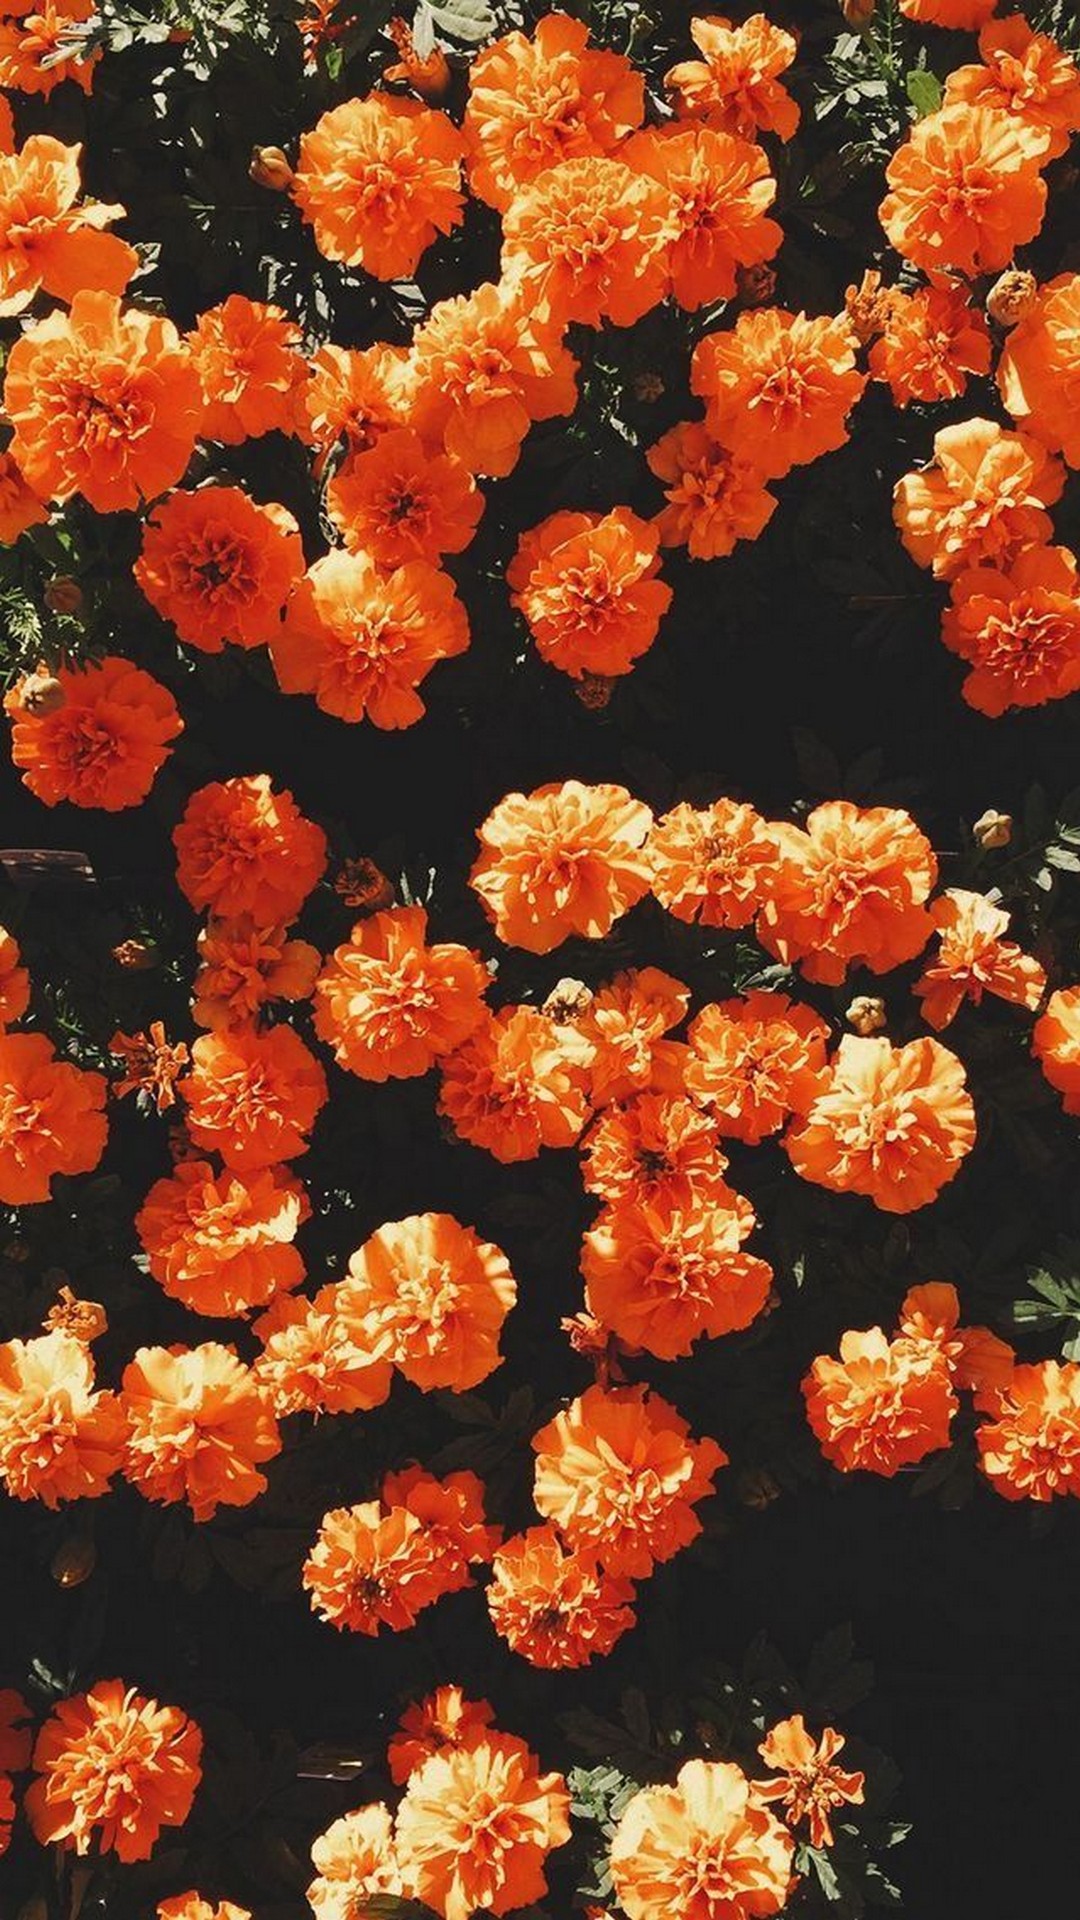 Orange Aesthetic Wallpaper iPhone HD With high-resolution 1080X1920 pixel. You can use this wallpaper for your iPhone 5, 6, 7, 8, X, XS, XR backgrounds, Mobile Screensaver, or iPad Lock Screen